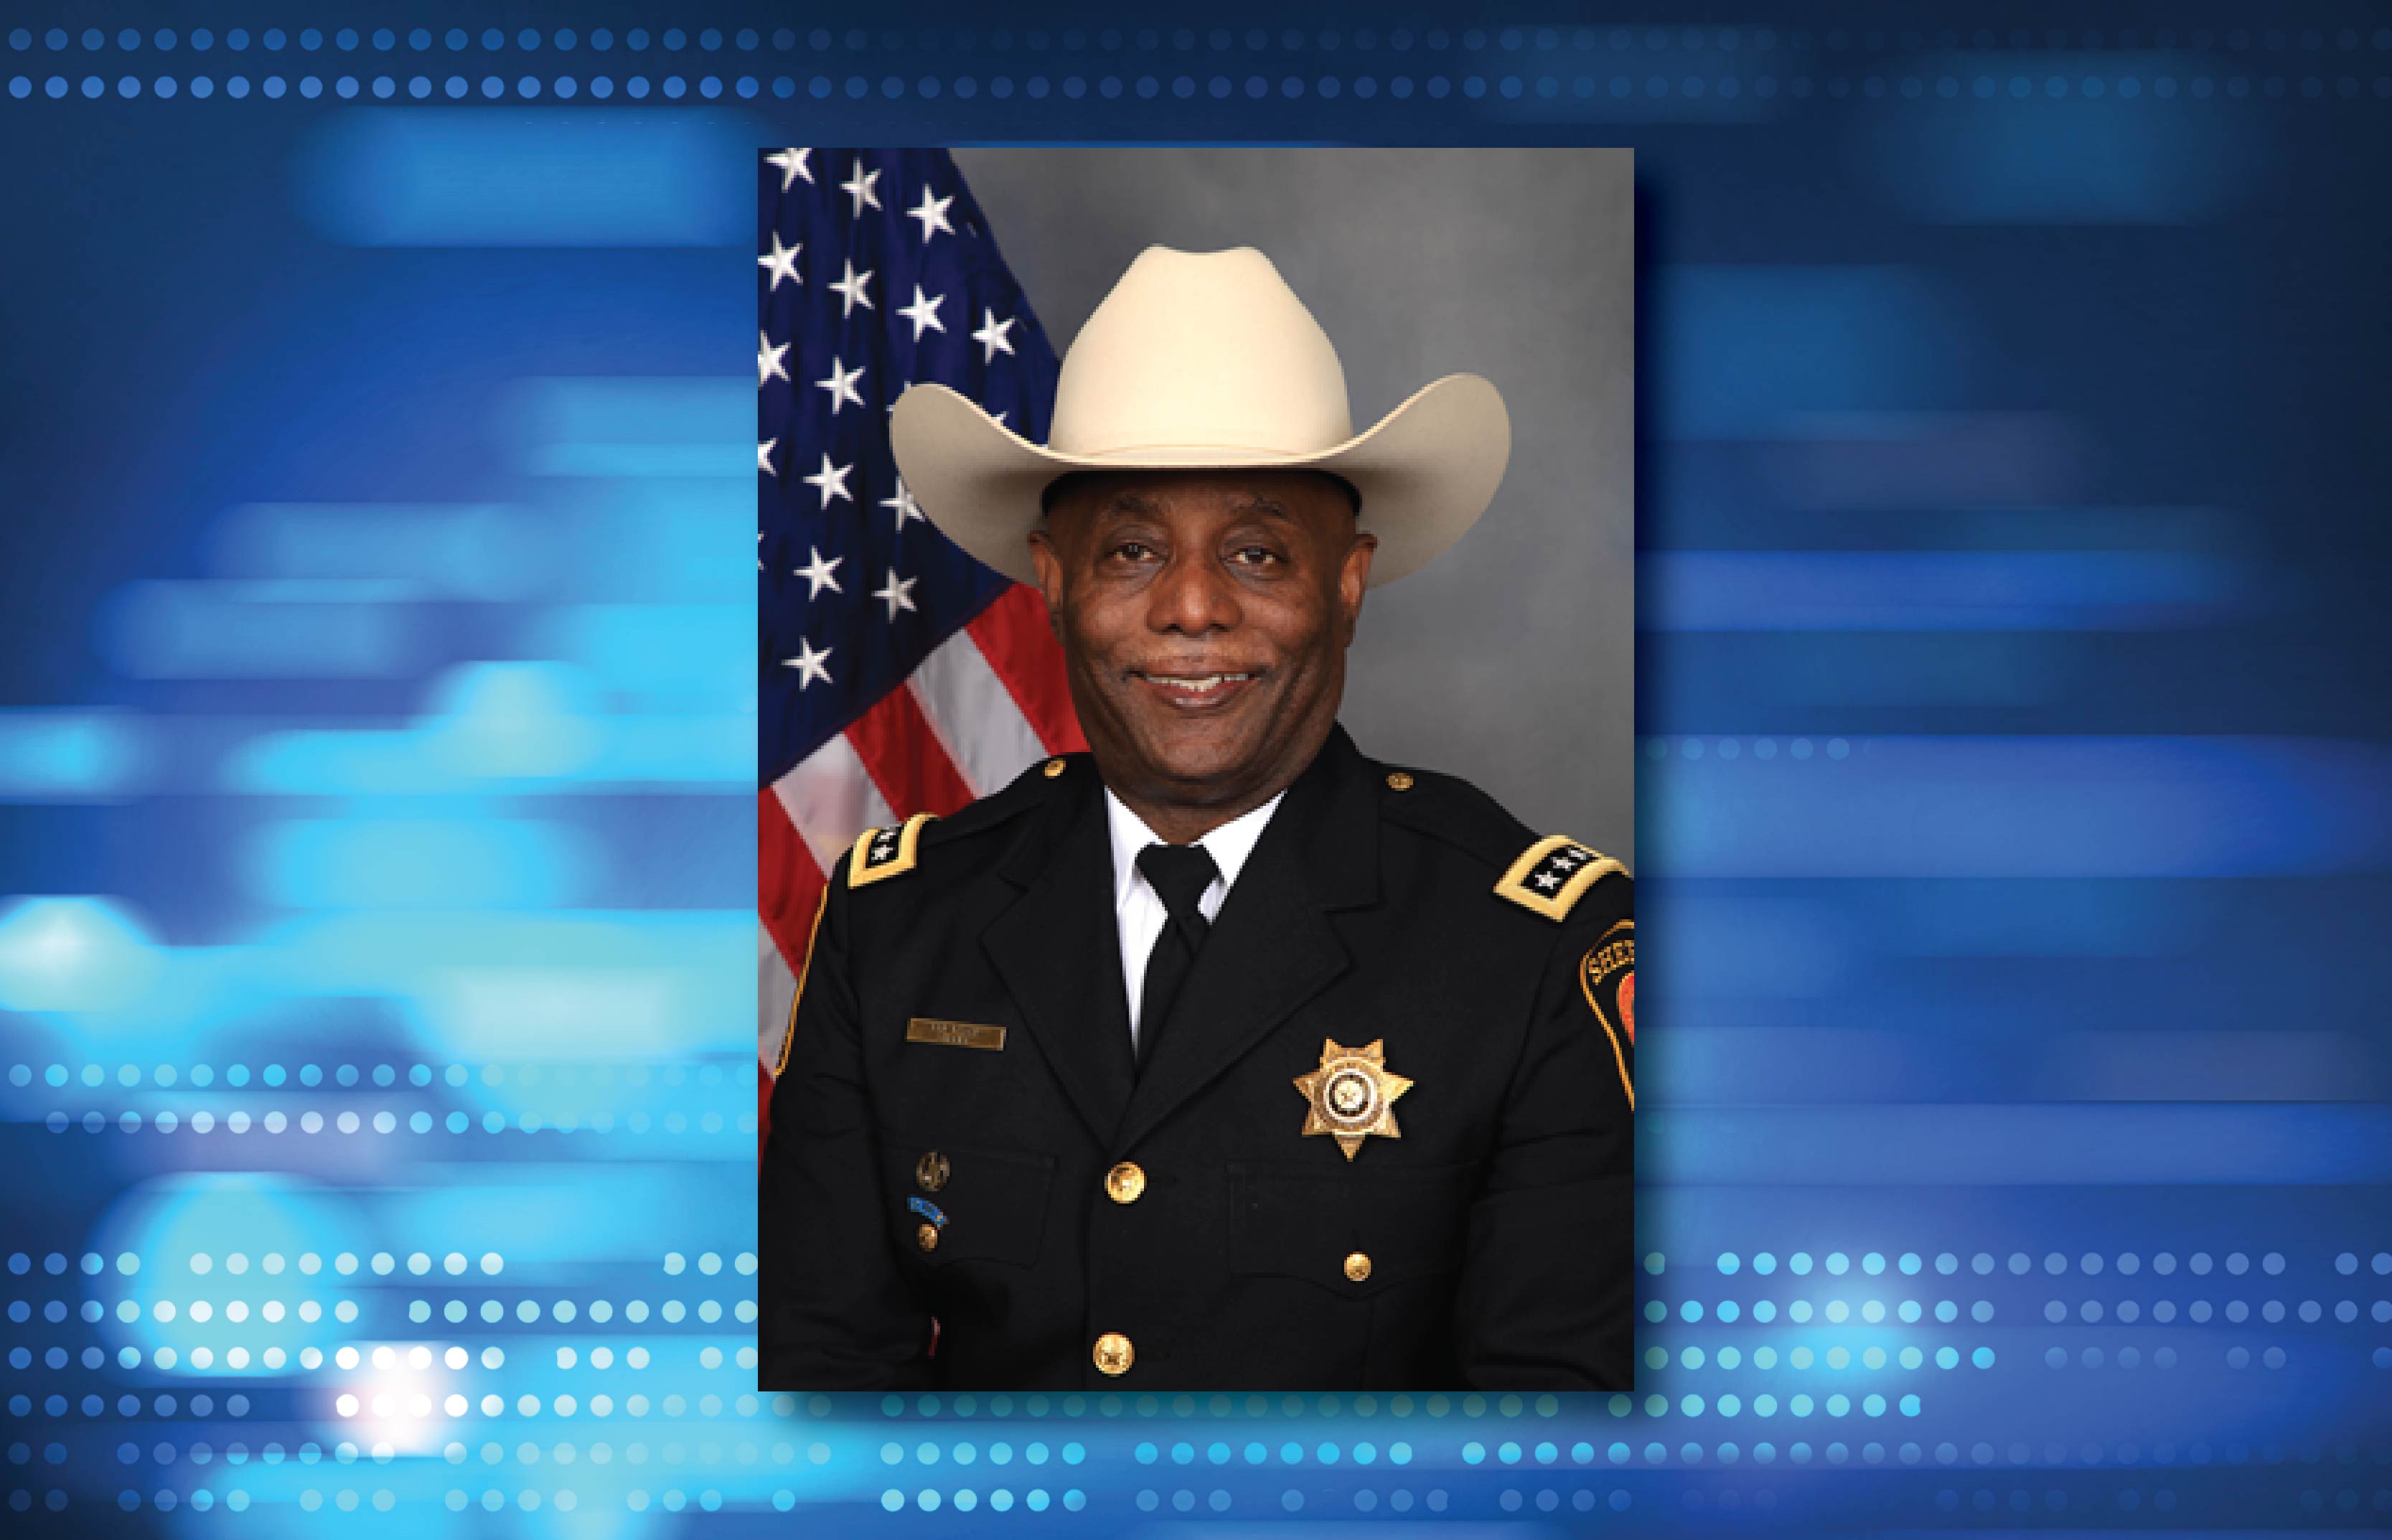   Fort Bend County Sheriff Eric Fagan Elected Vice Chair of Houston HIDTA